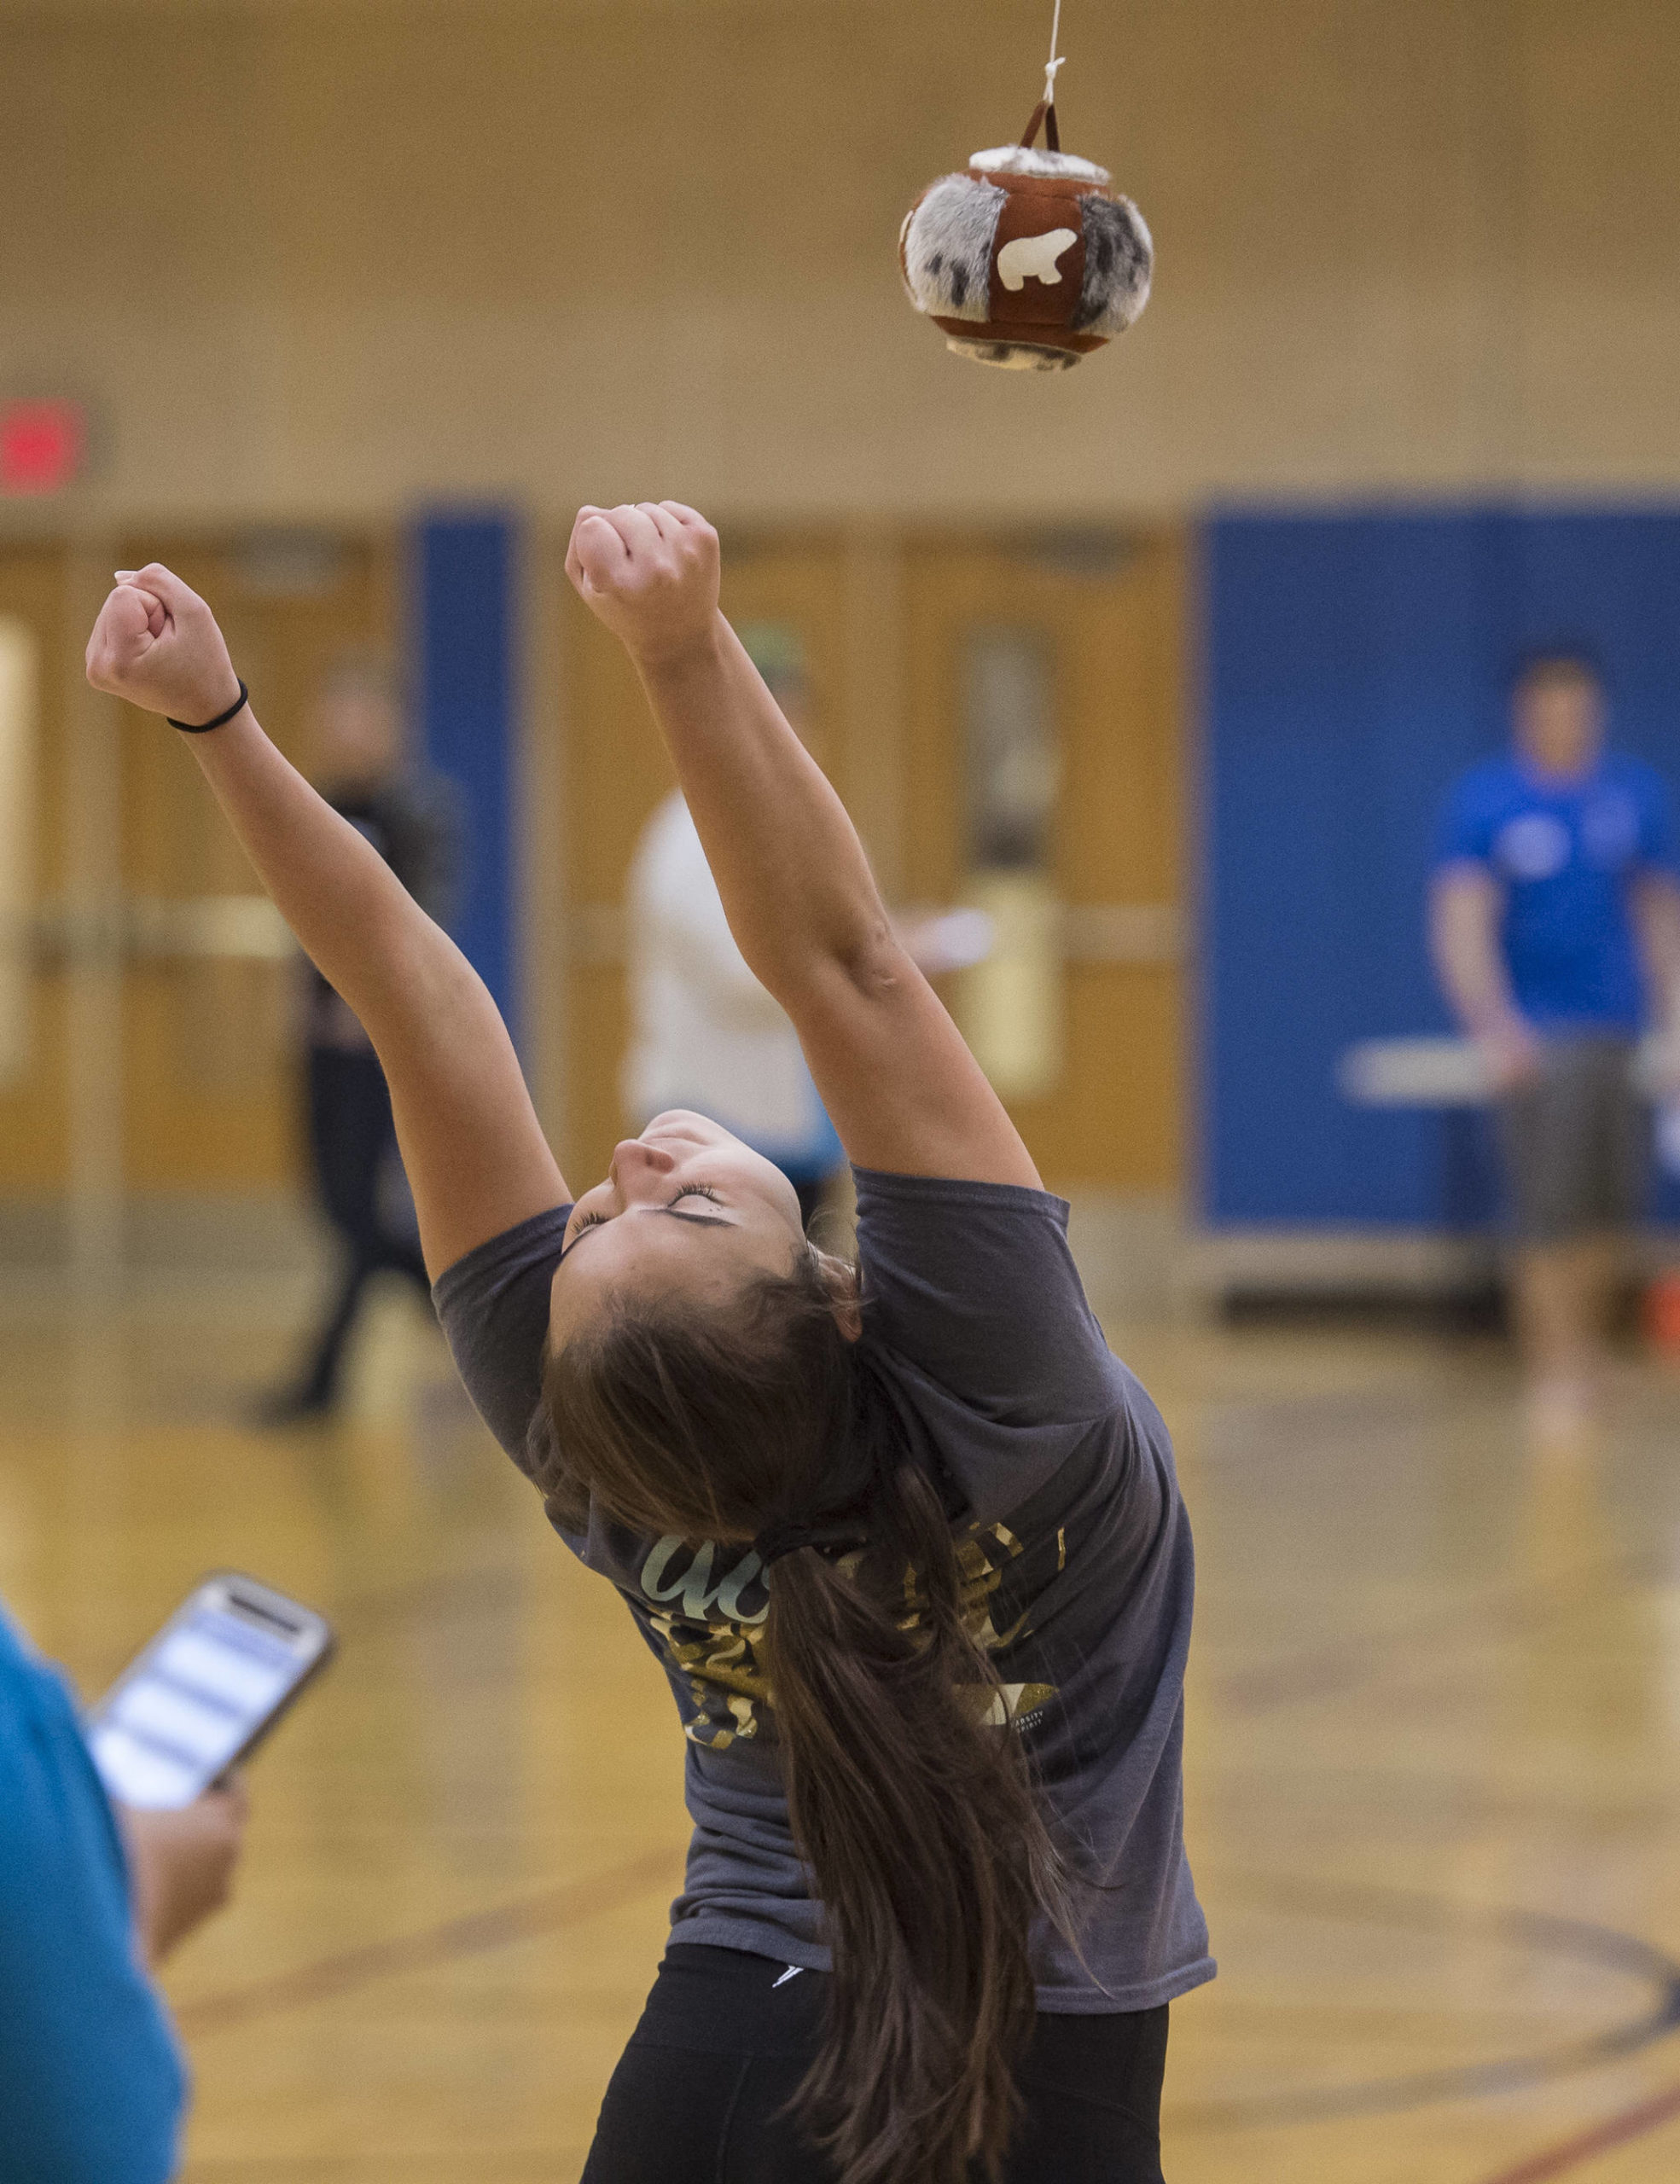 Michael Penn | Juneau Empire File                                Orion Denny, 16, rejoices in winning the high school adult one-foot high kick competition at the Native Youth Olympics 2018 Traditional Games at the University of Alaska Southeast Recreational Center in March 2018.